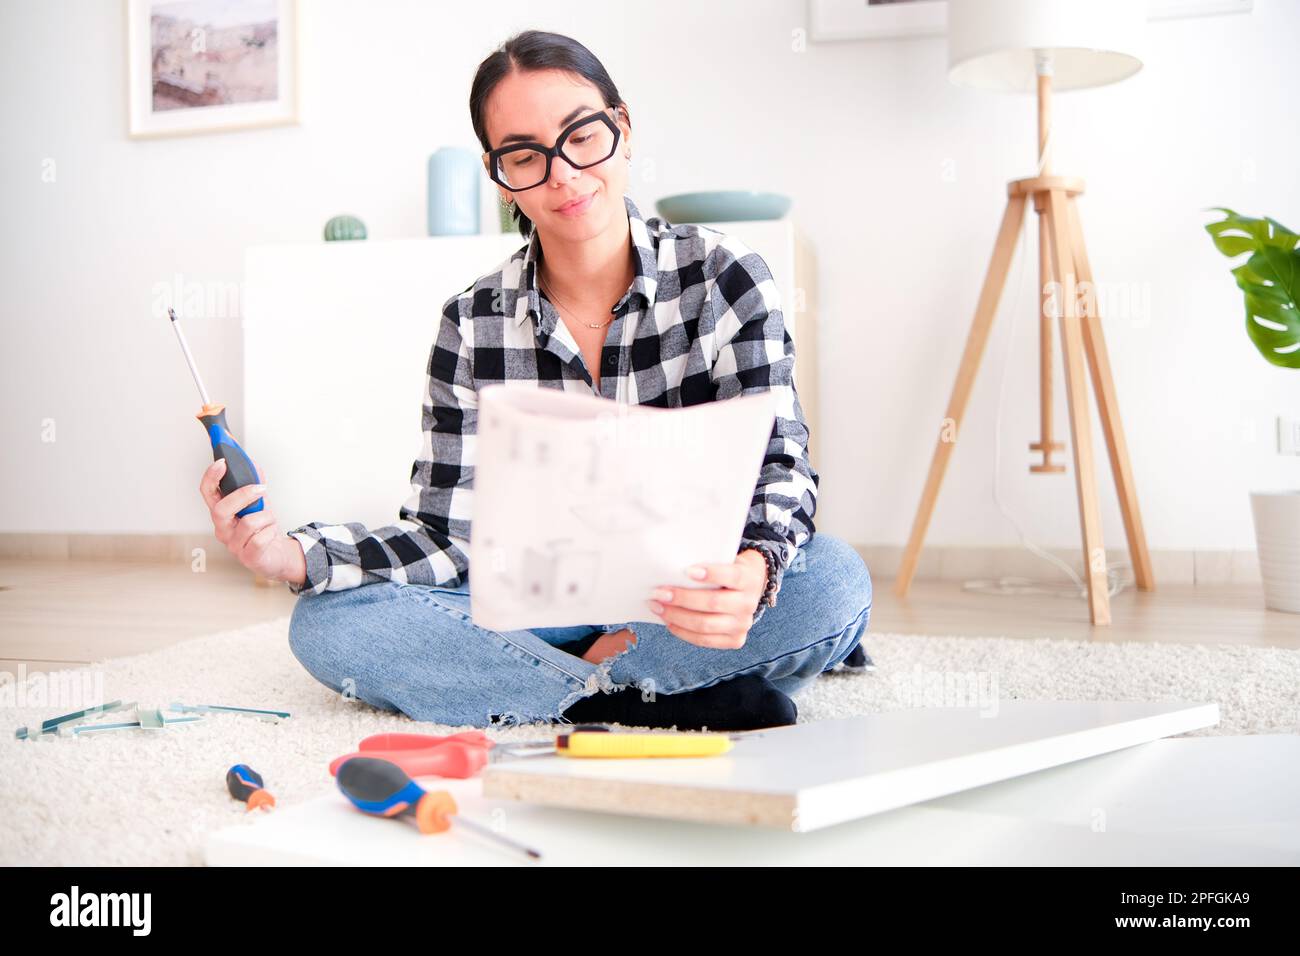 Woman who is assembling furniture in her home as part of a renovation project. She is using a variety of tools Stock Photo